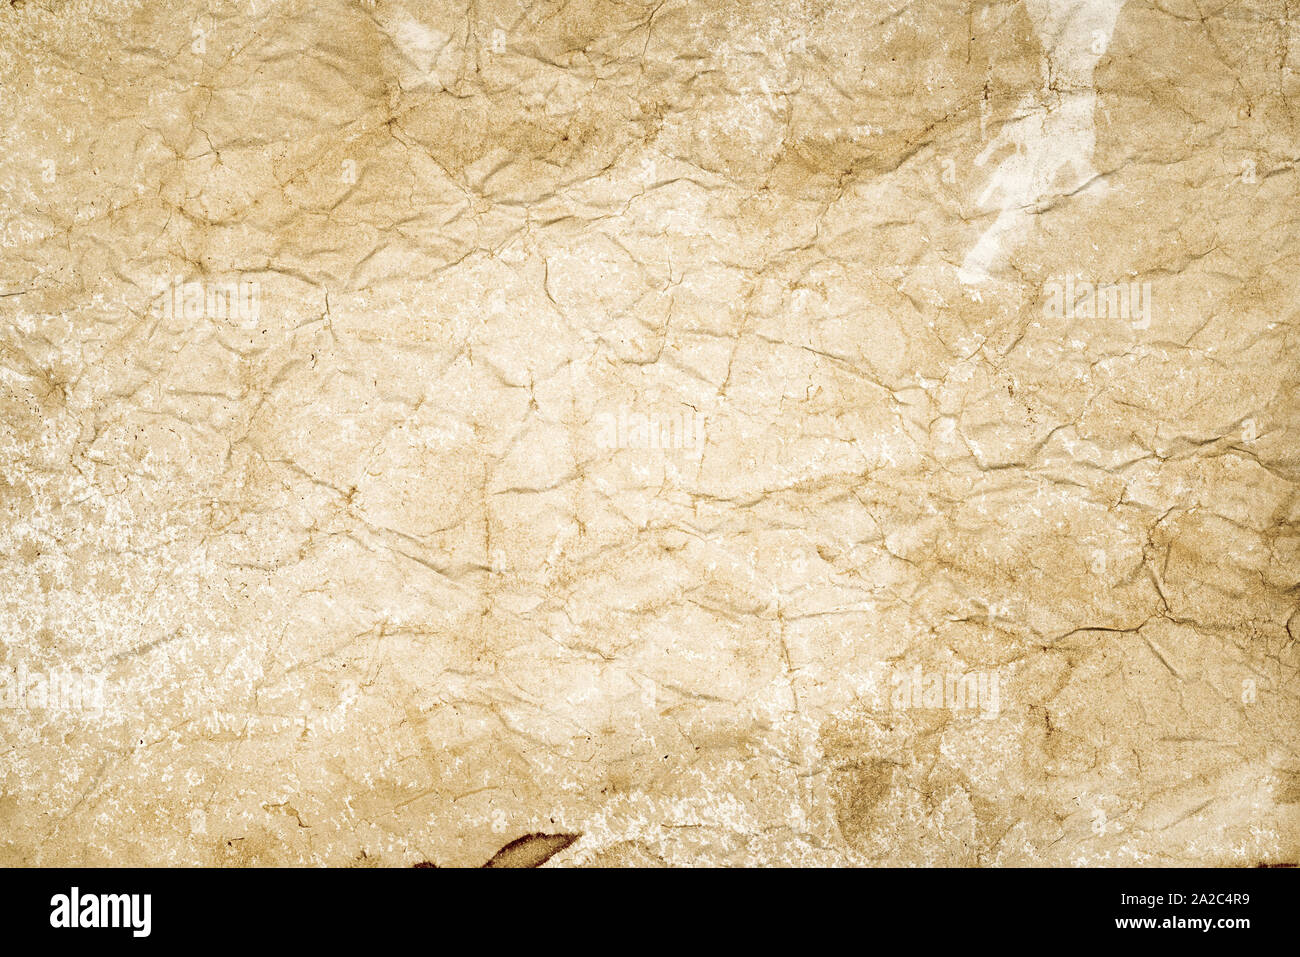 Old crumpled paper background Stock Photo